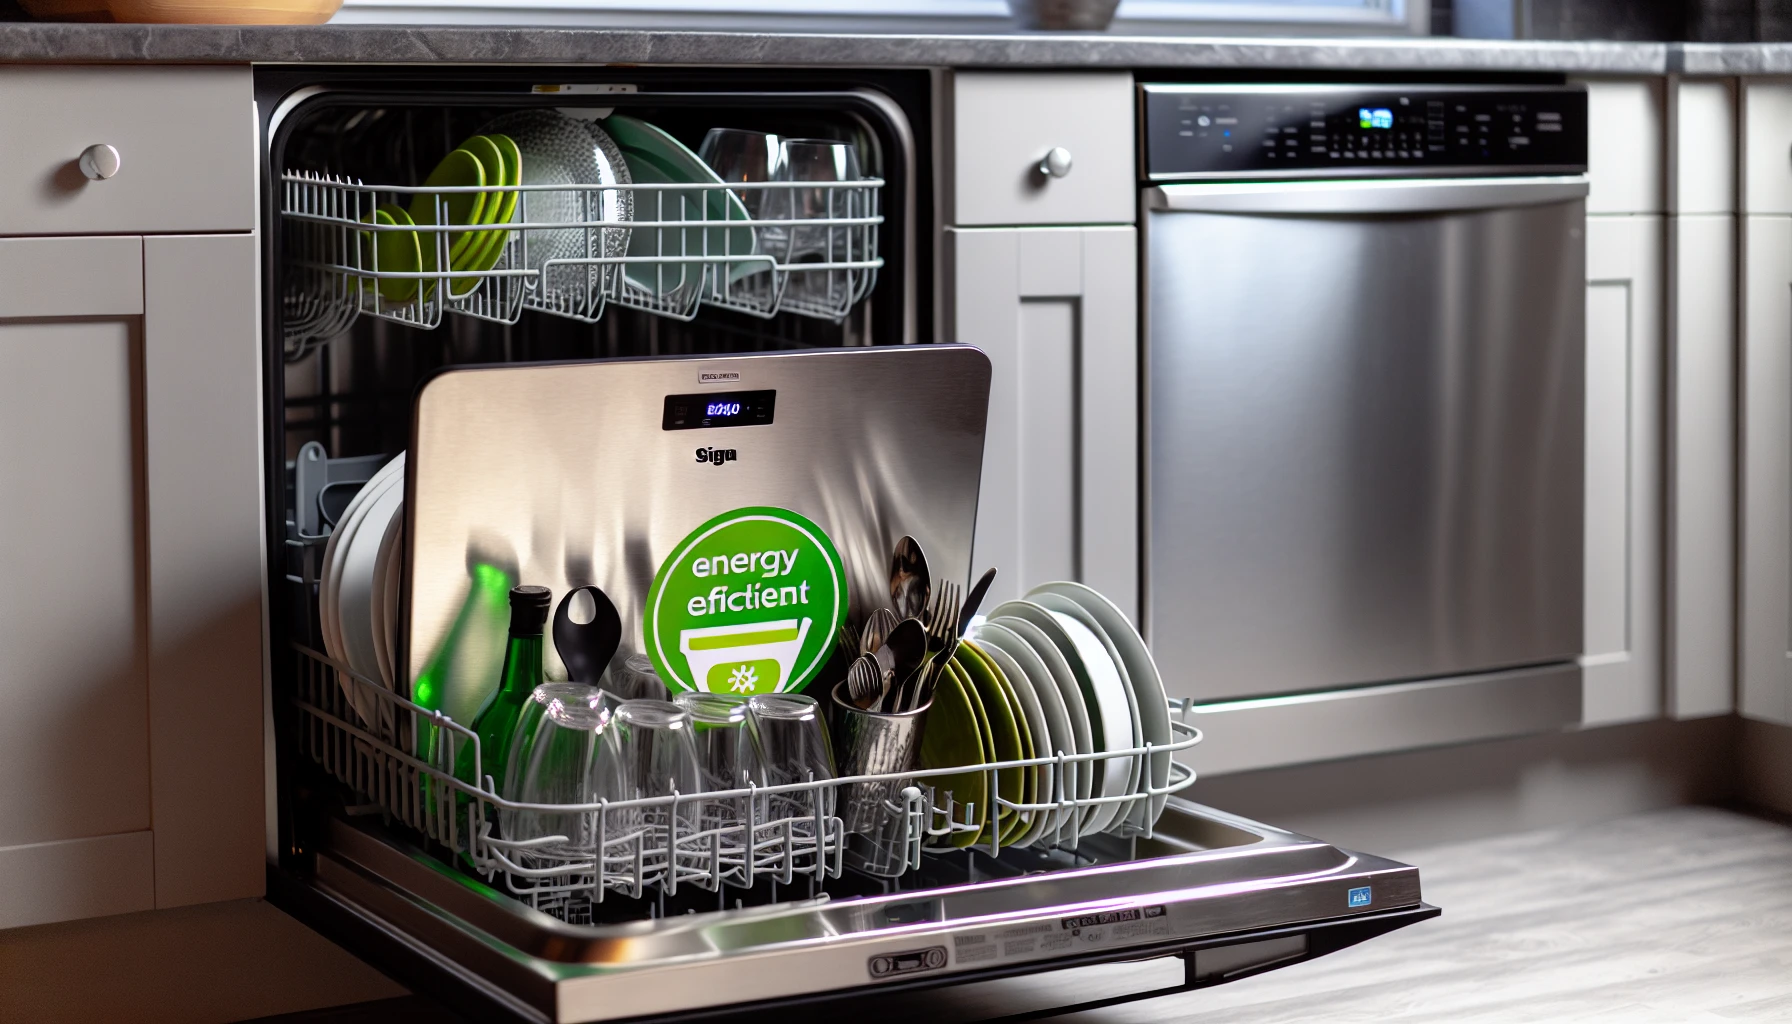 Full dishwasher with energy-efficient label - save money on your water bill